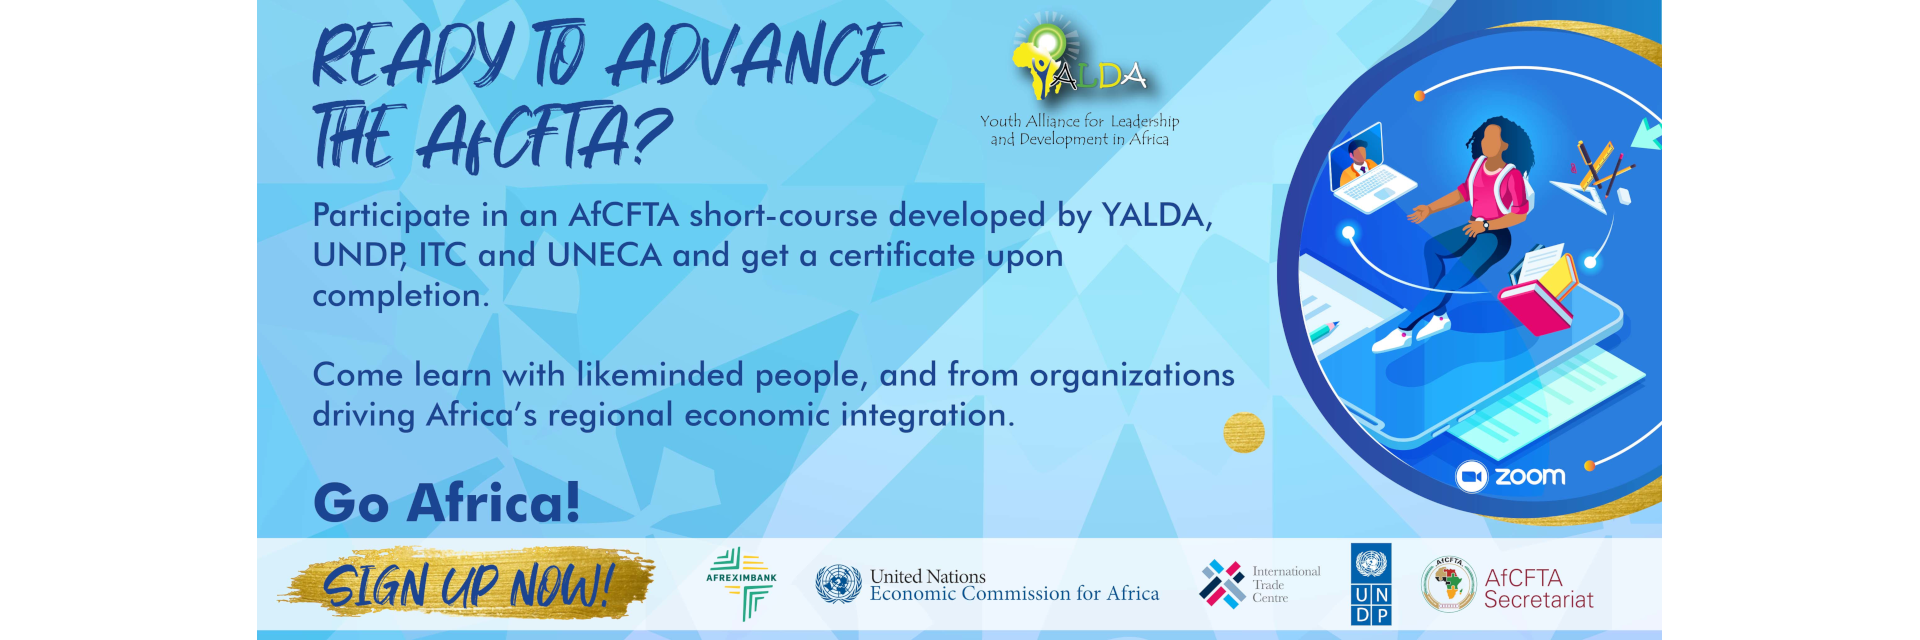 Umoja Africa Campaign – Youth Contributing to the Implementation of the AfCFTA